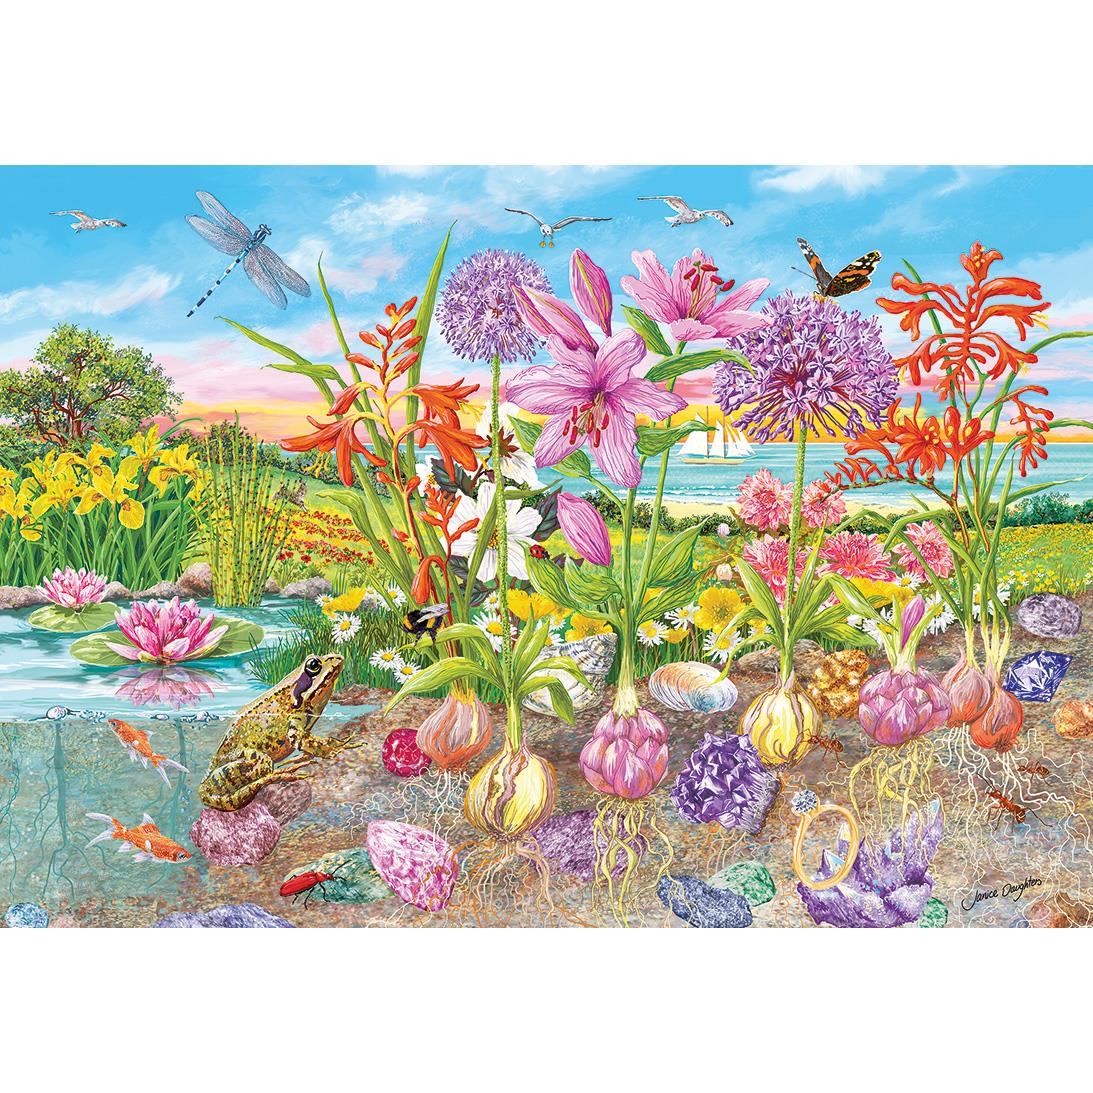 Roots & Shoots 4 x 500 Piece Jigsaw Puzzle – All Jigsaw Puzzles